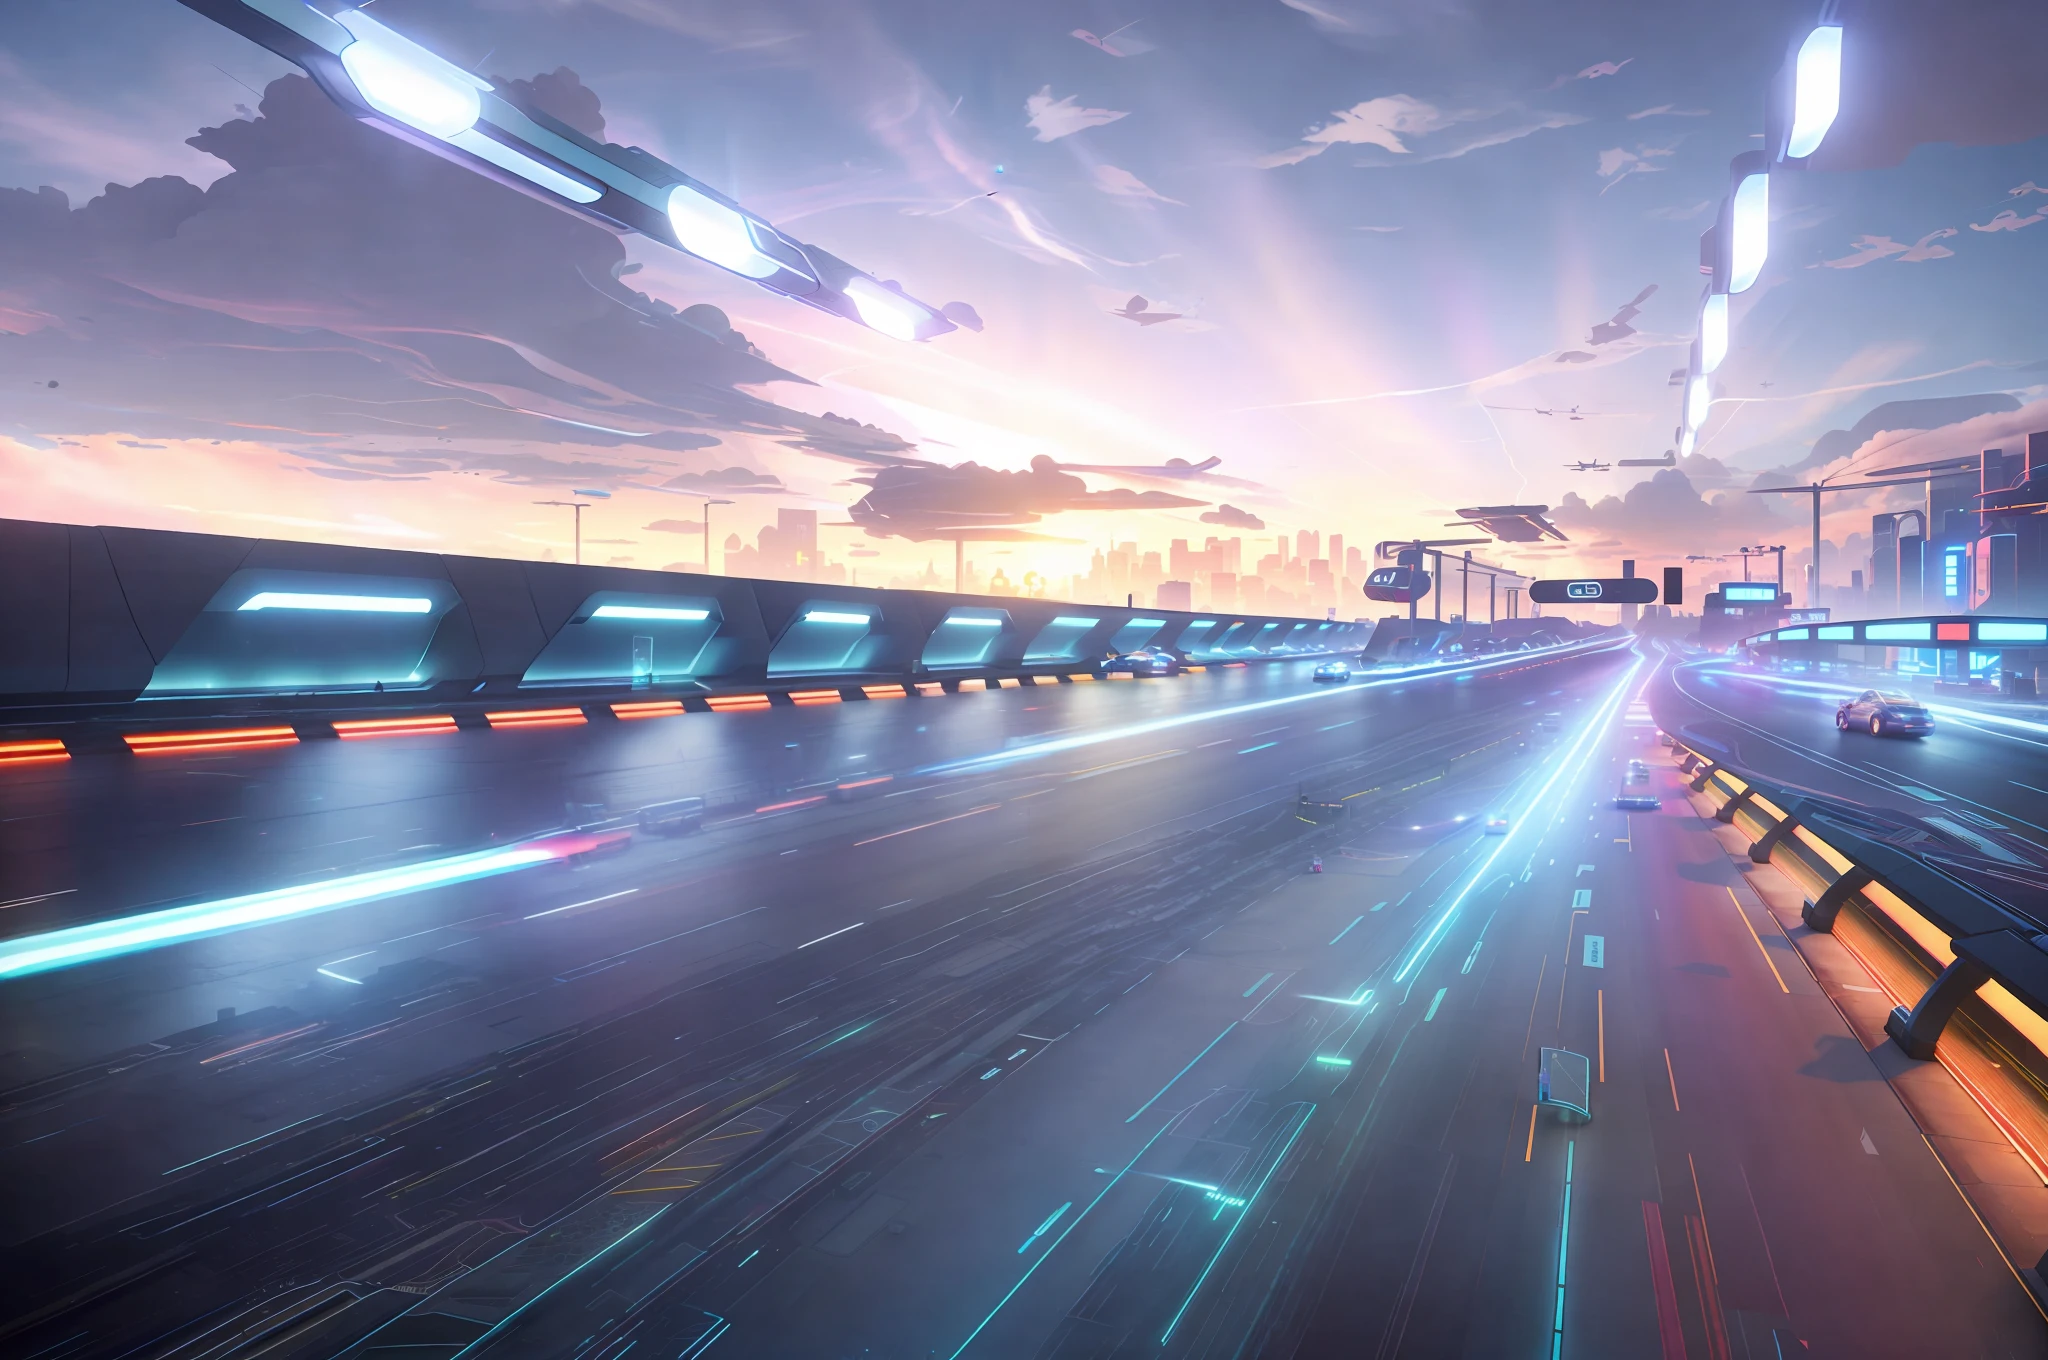 Colorful futuristic city runway, lights on both sides of the road hitting the ground, dynamic clouds in the distance, sunrise and morning light. Justin Maller's overall tone is lighthearted and whimsical